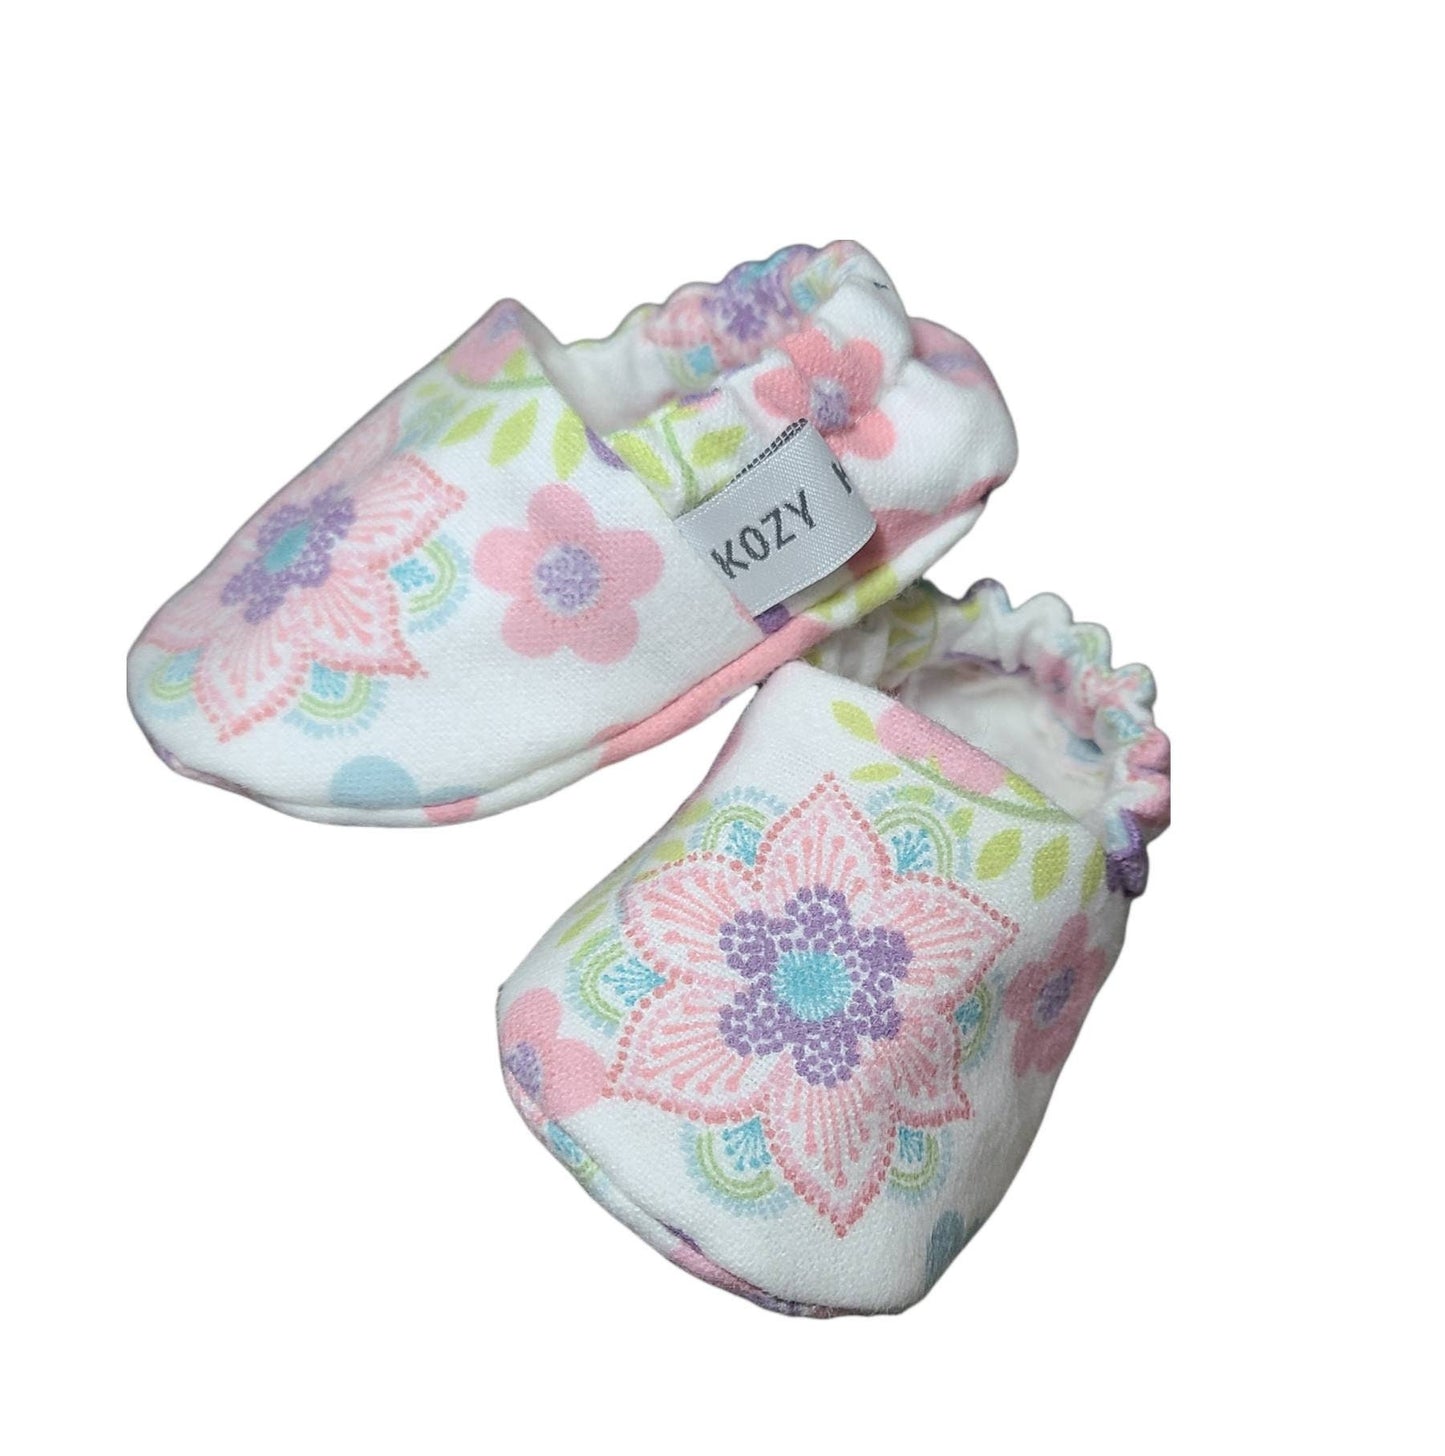 Floral Baby Shoes, Baby Girl Slipper, Floral Crib Shoes, Floral Baby Moccs, Floral Baby Slippers, Flowered Baby Slippers, Baby Girl Shoes